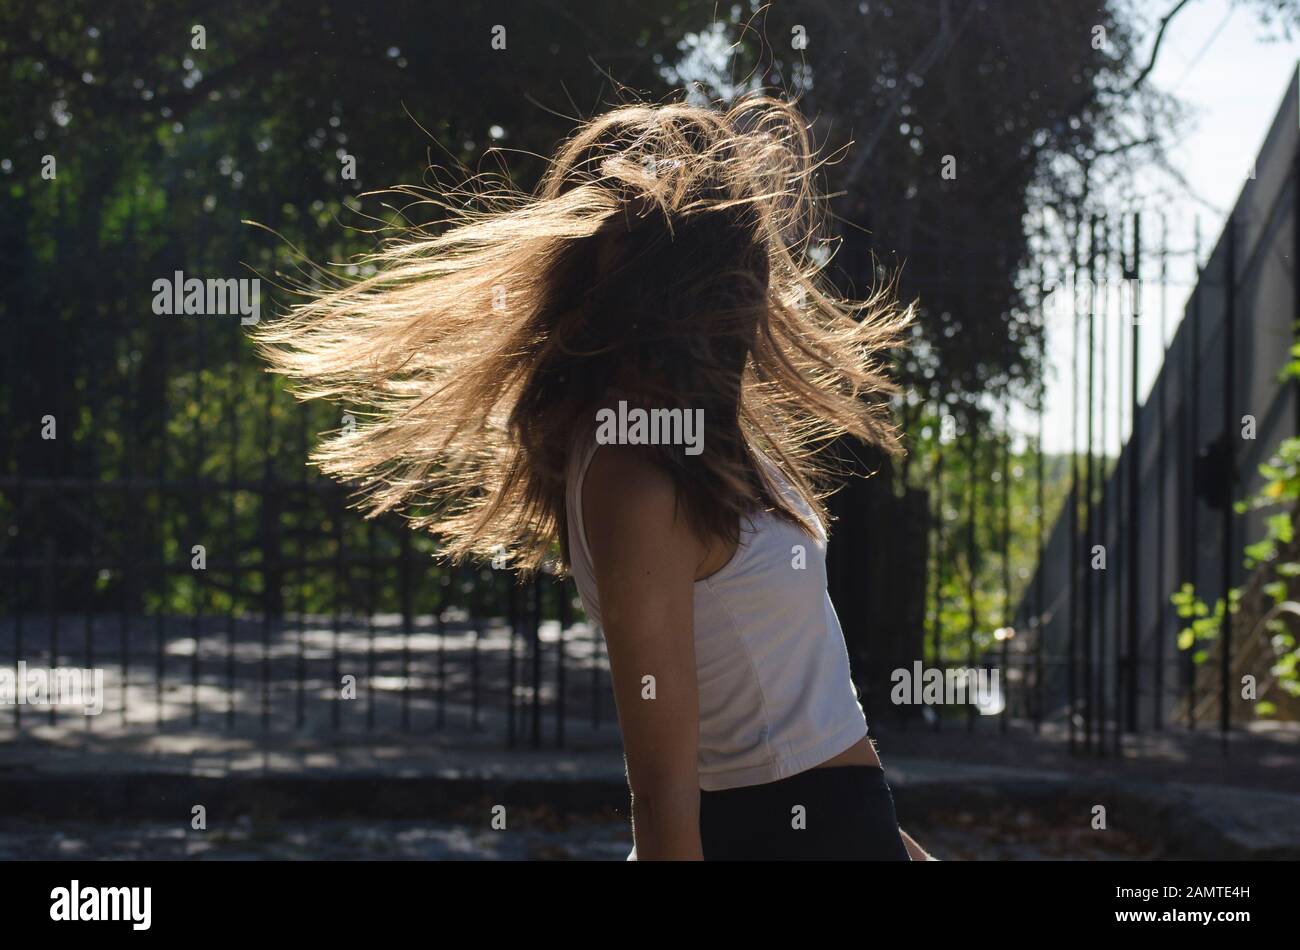 Teenage girl standing in the street spinning around, Argentina Stock Photo